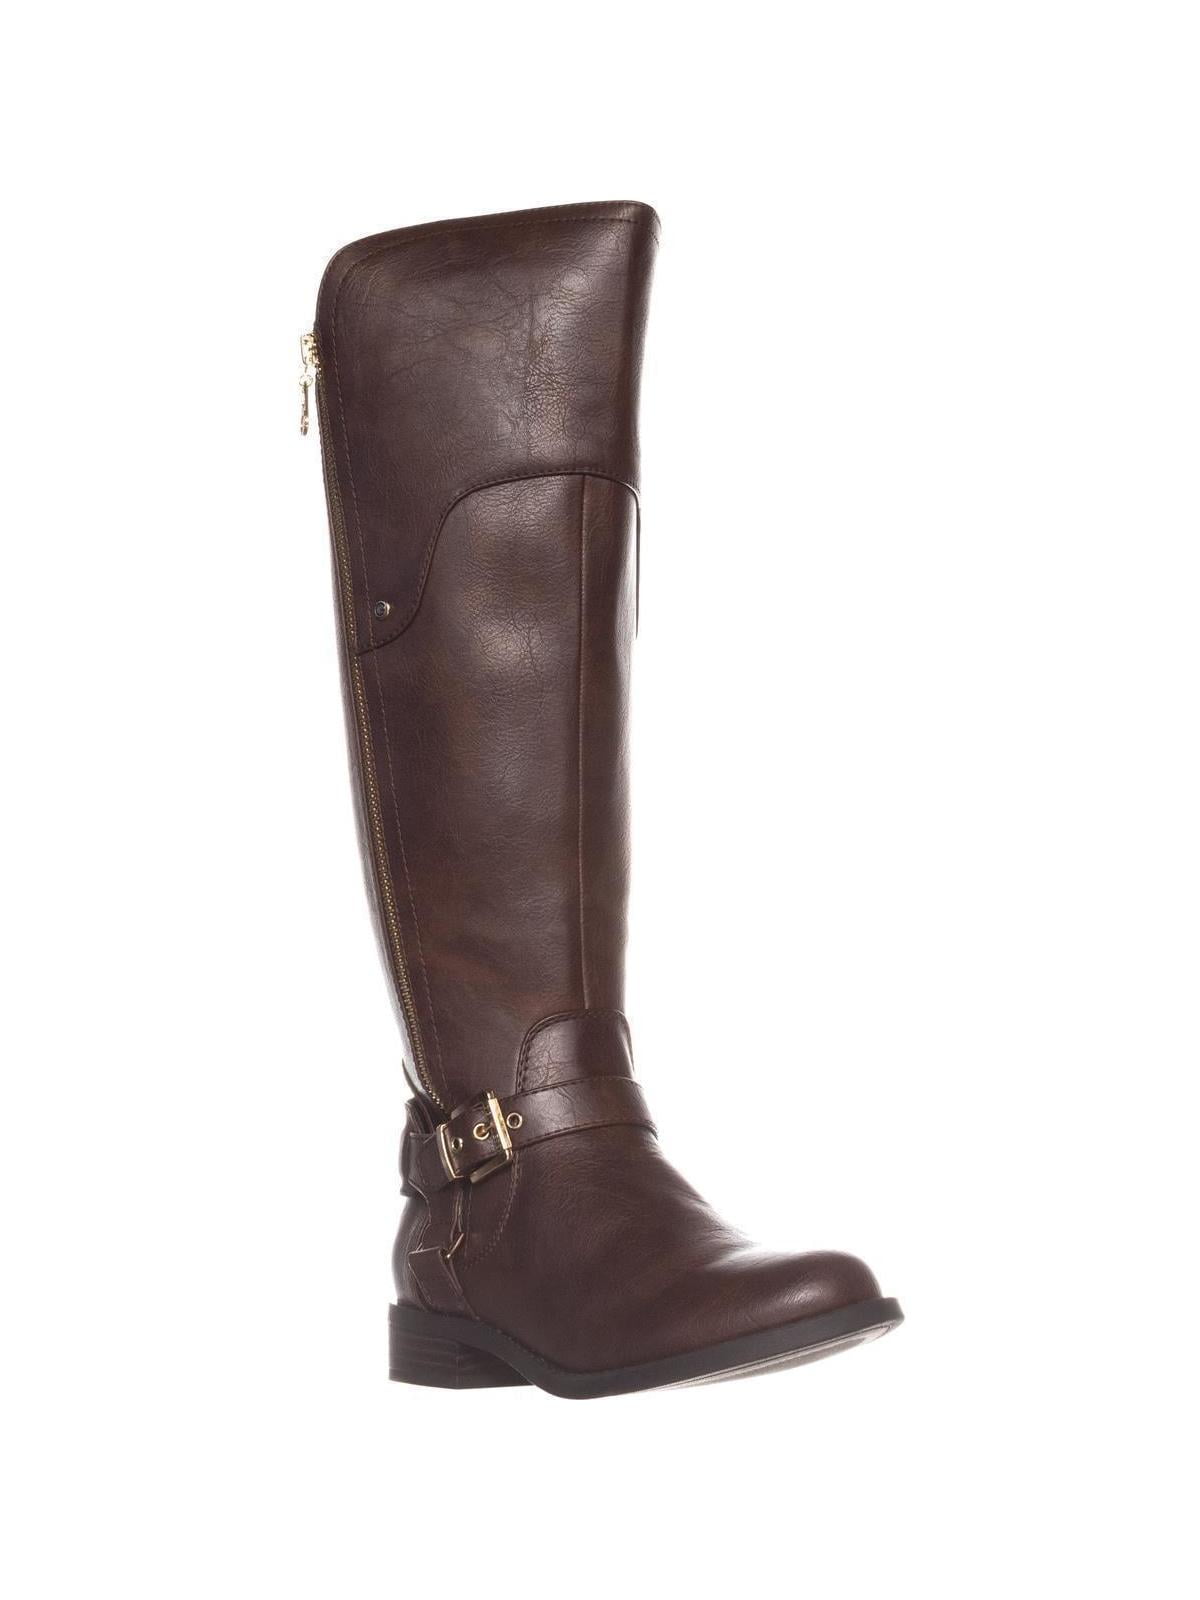 G by Guess Womens haydin Leather Round Toe Knee High Fashion Boots fast ...